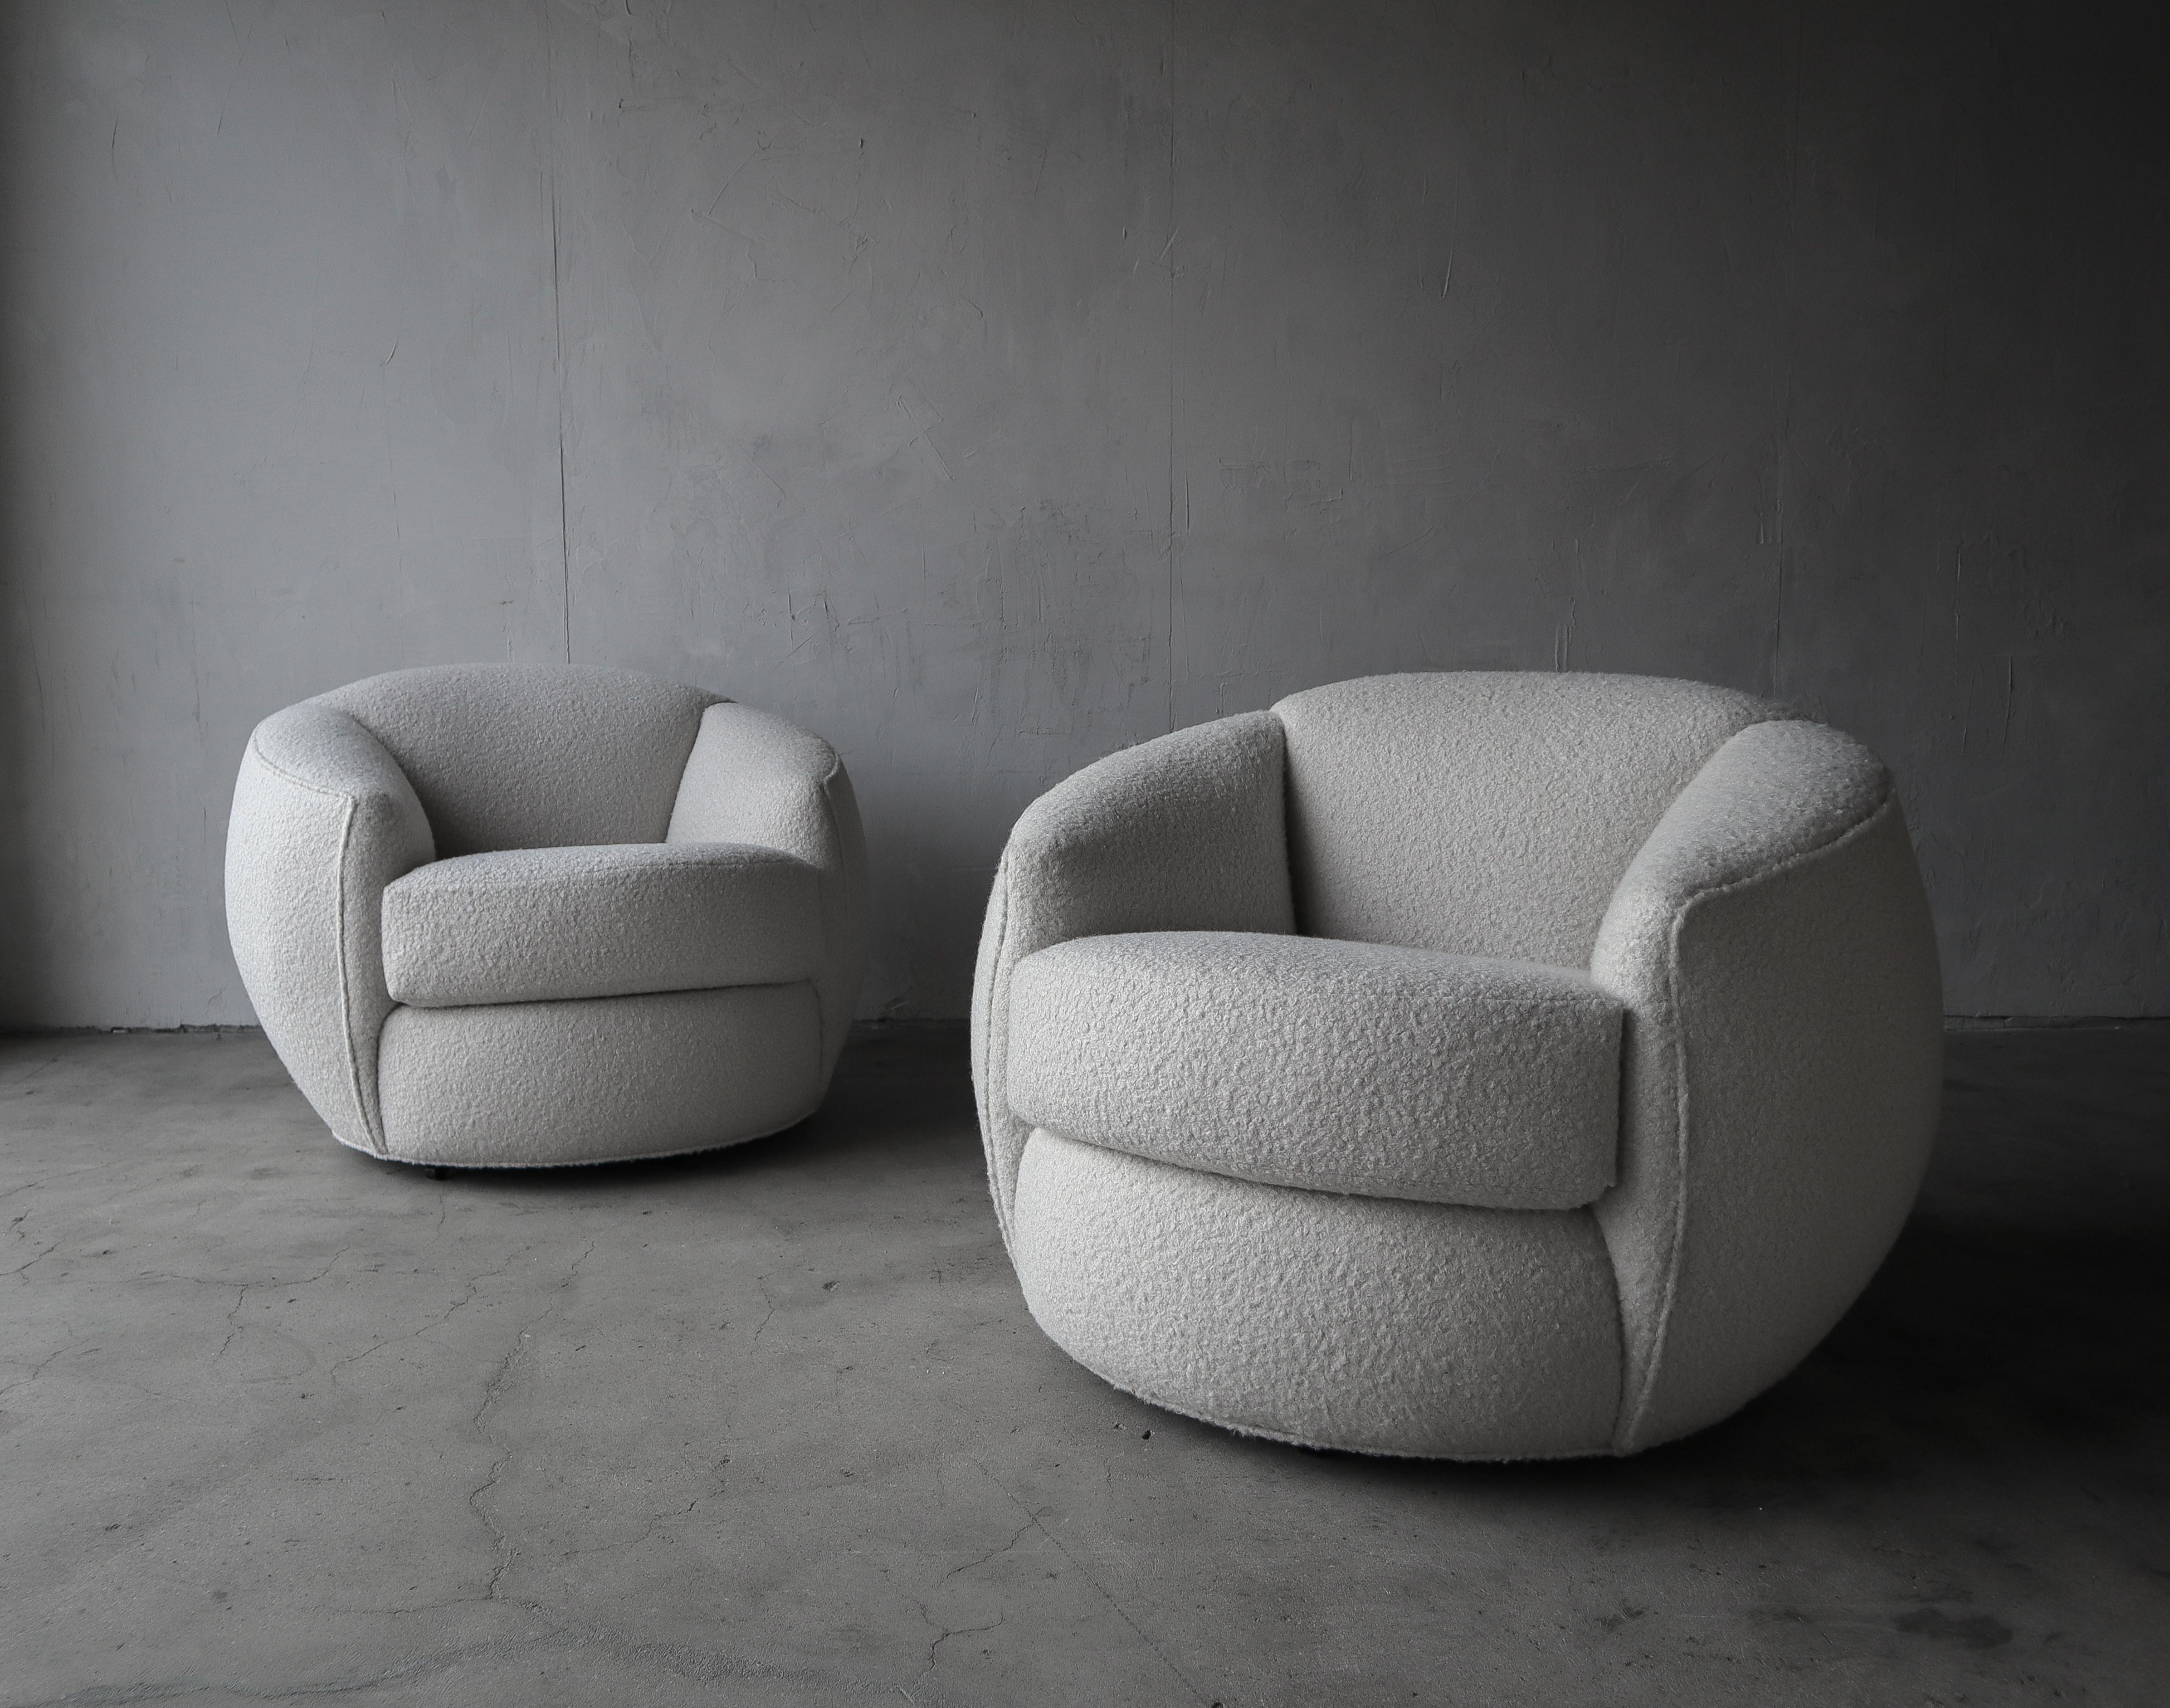 Pictures do not do these justice. This is a truly gorgeous pair of Post Modern ball chairs that have been modernized with all new off white boucle fabric and new foam. They are quite large however the femininity of their shape adds to their appeal,